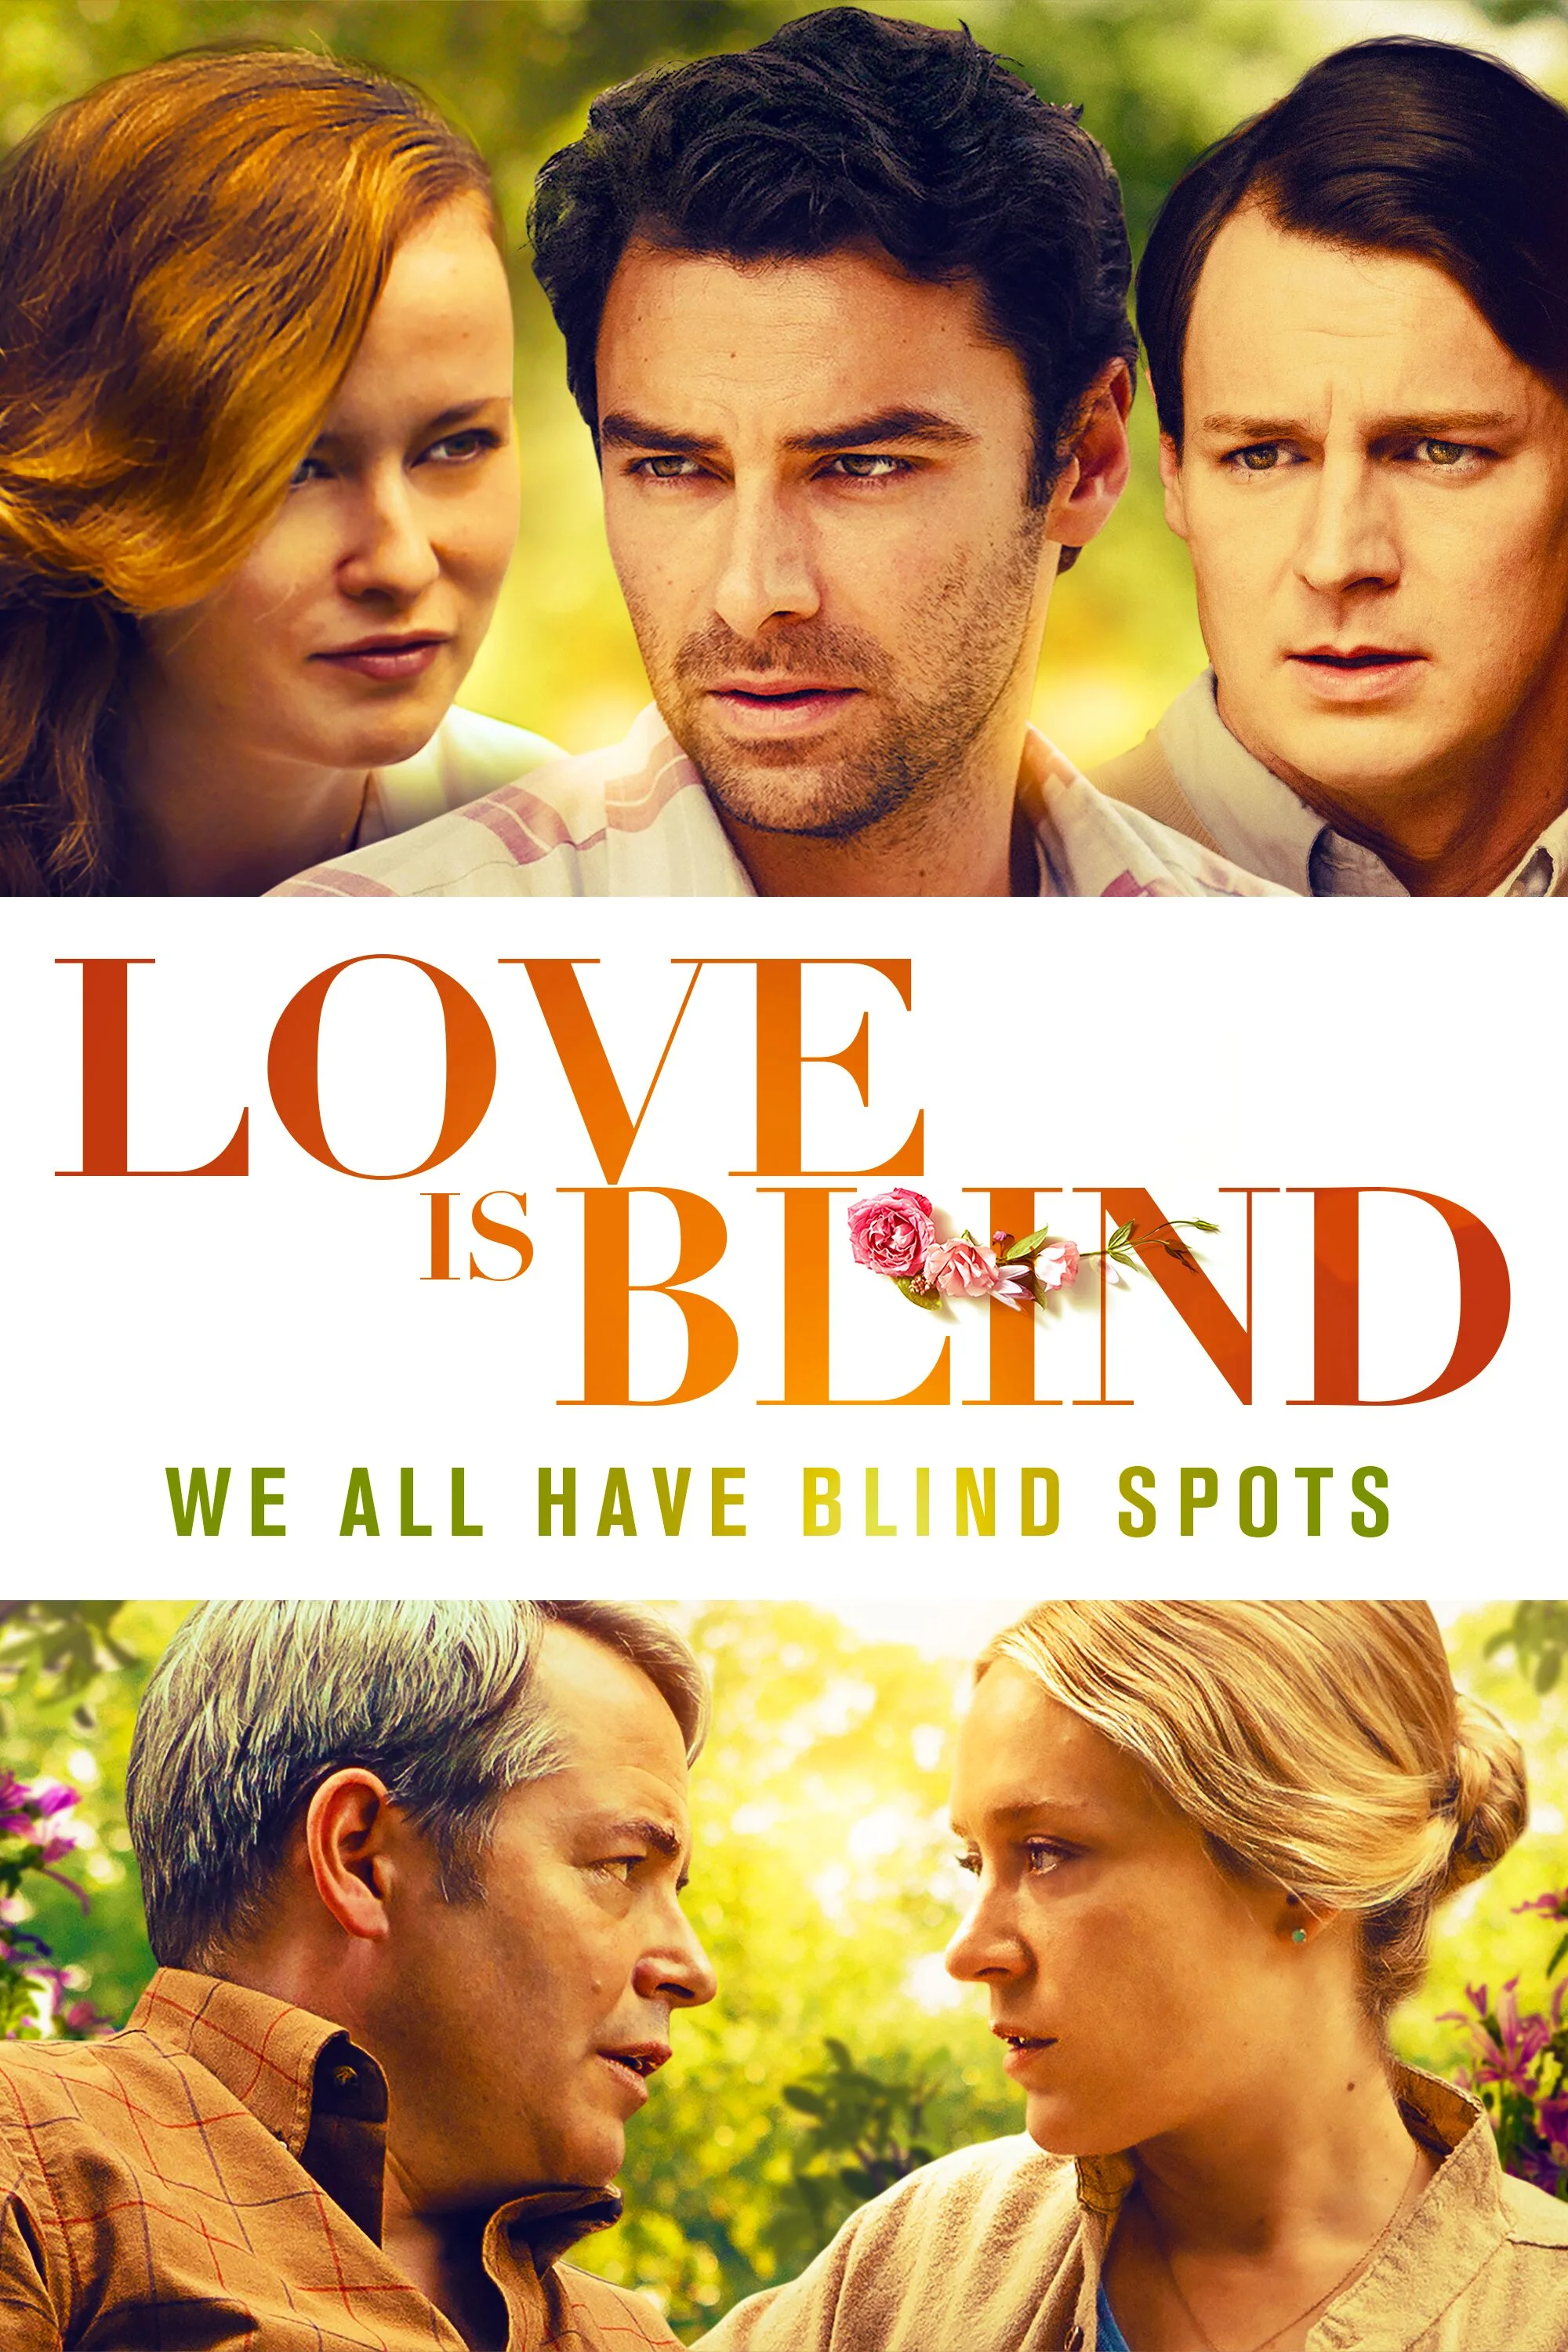 Love Is All You Need? The Movie